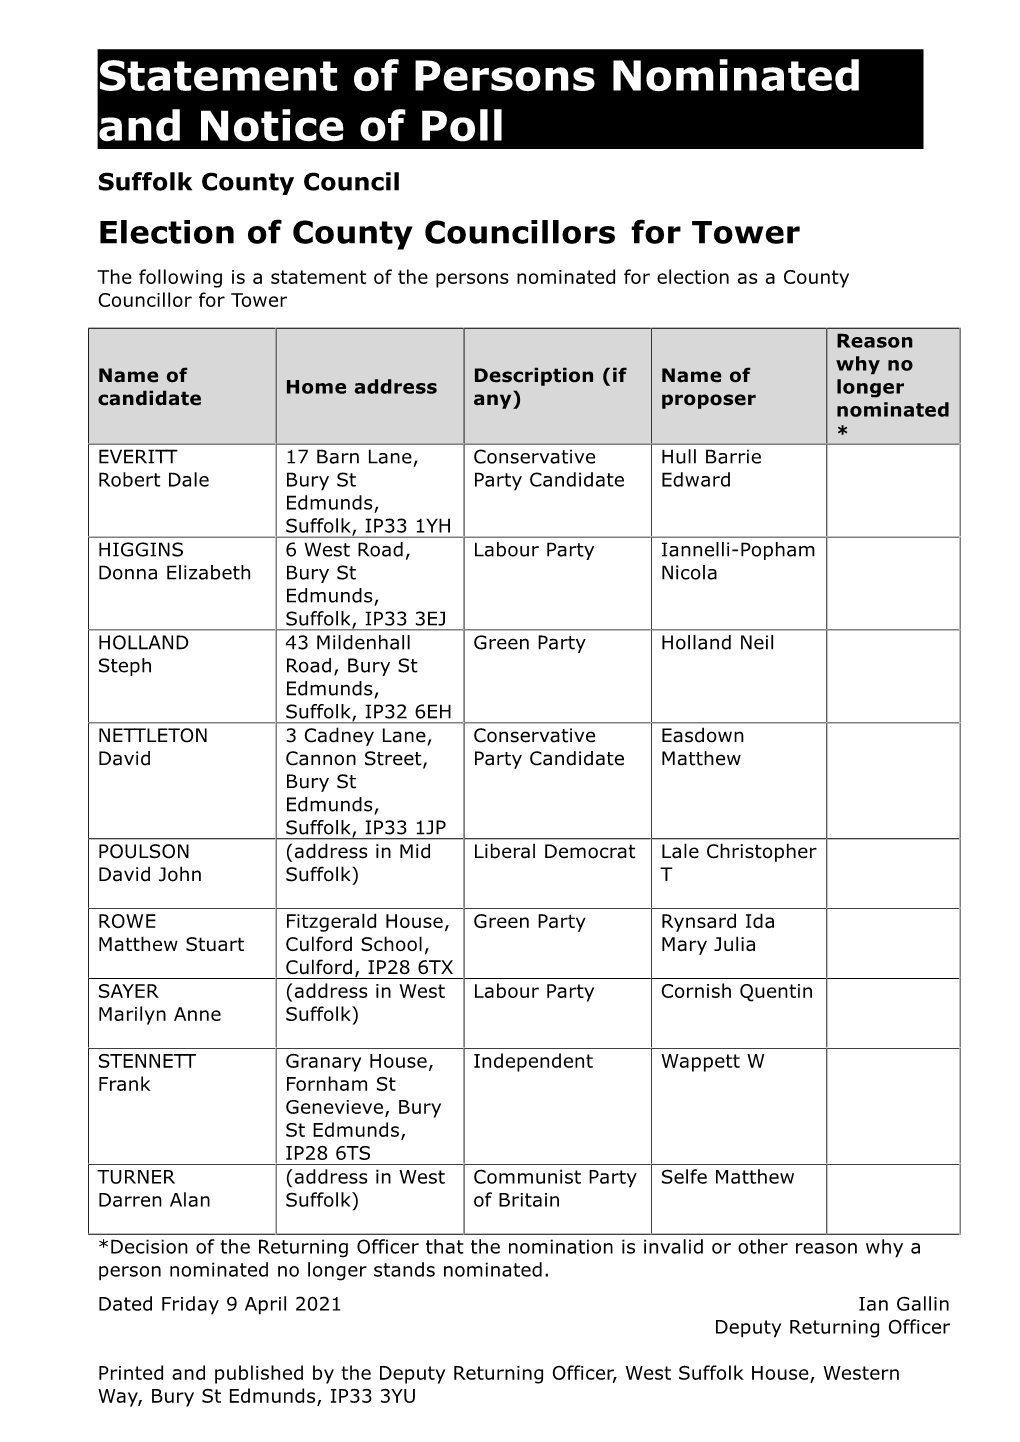 Statement of Persons Nominated and Notice of Poll Suffolk County Council Election of County Councillors for Tower